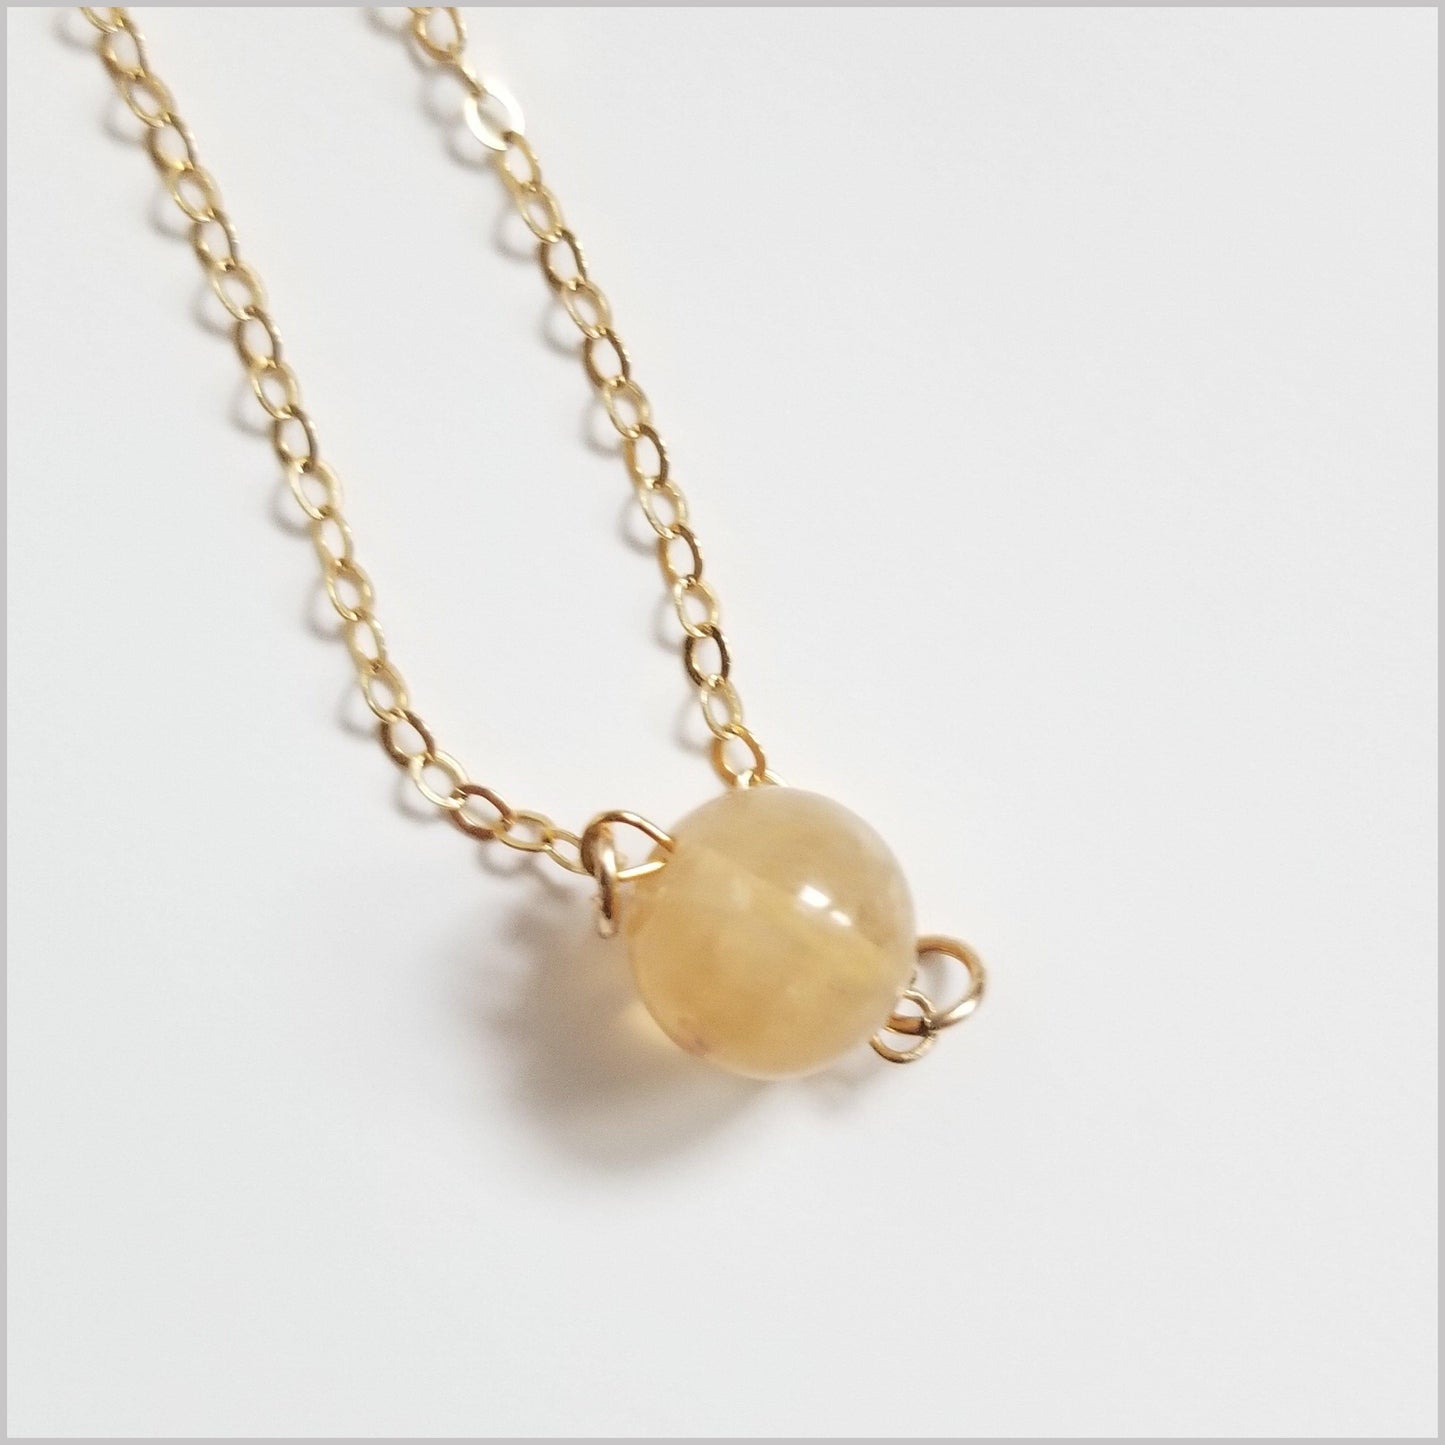 Natural Citrine Bead Necklace